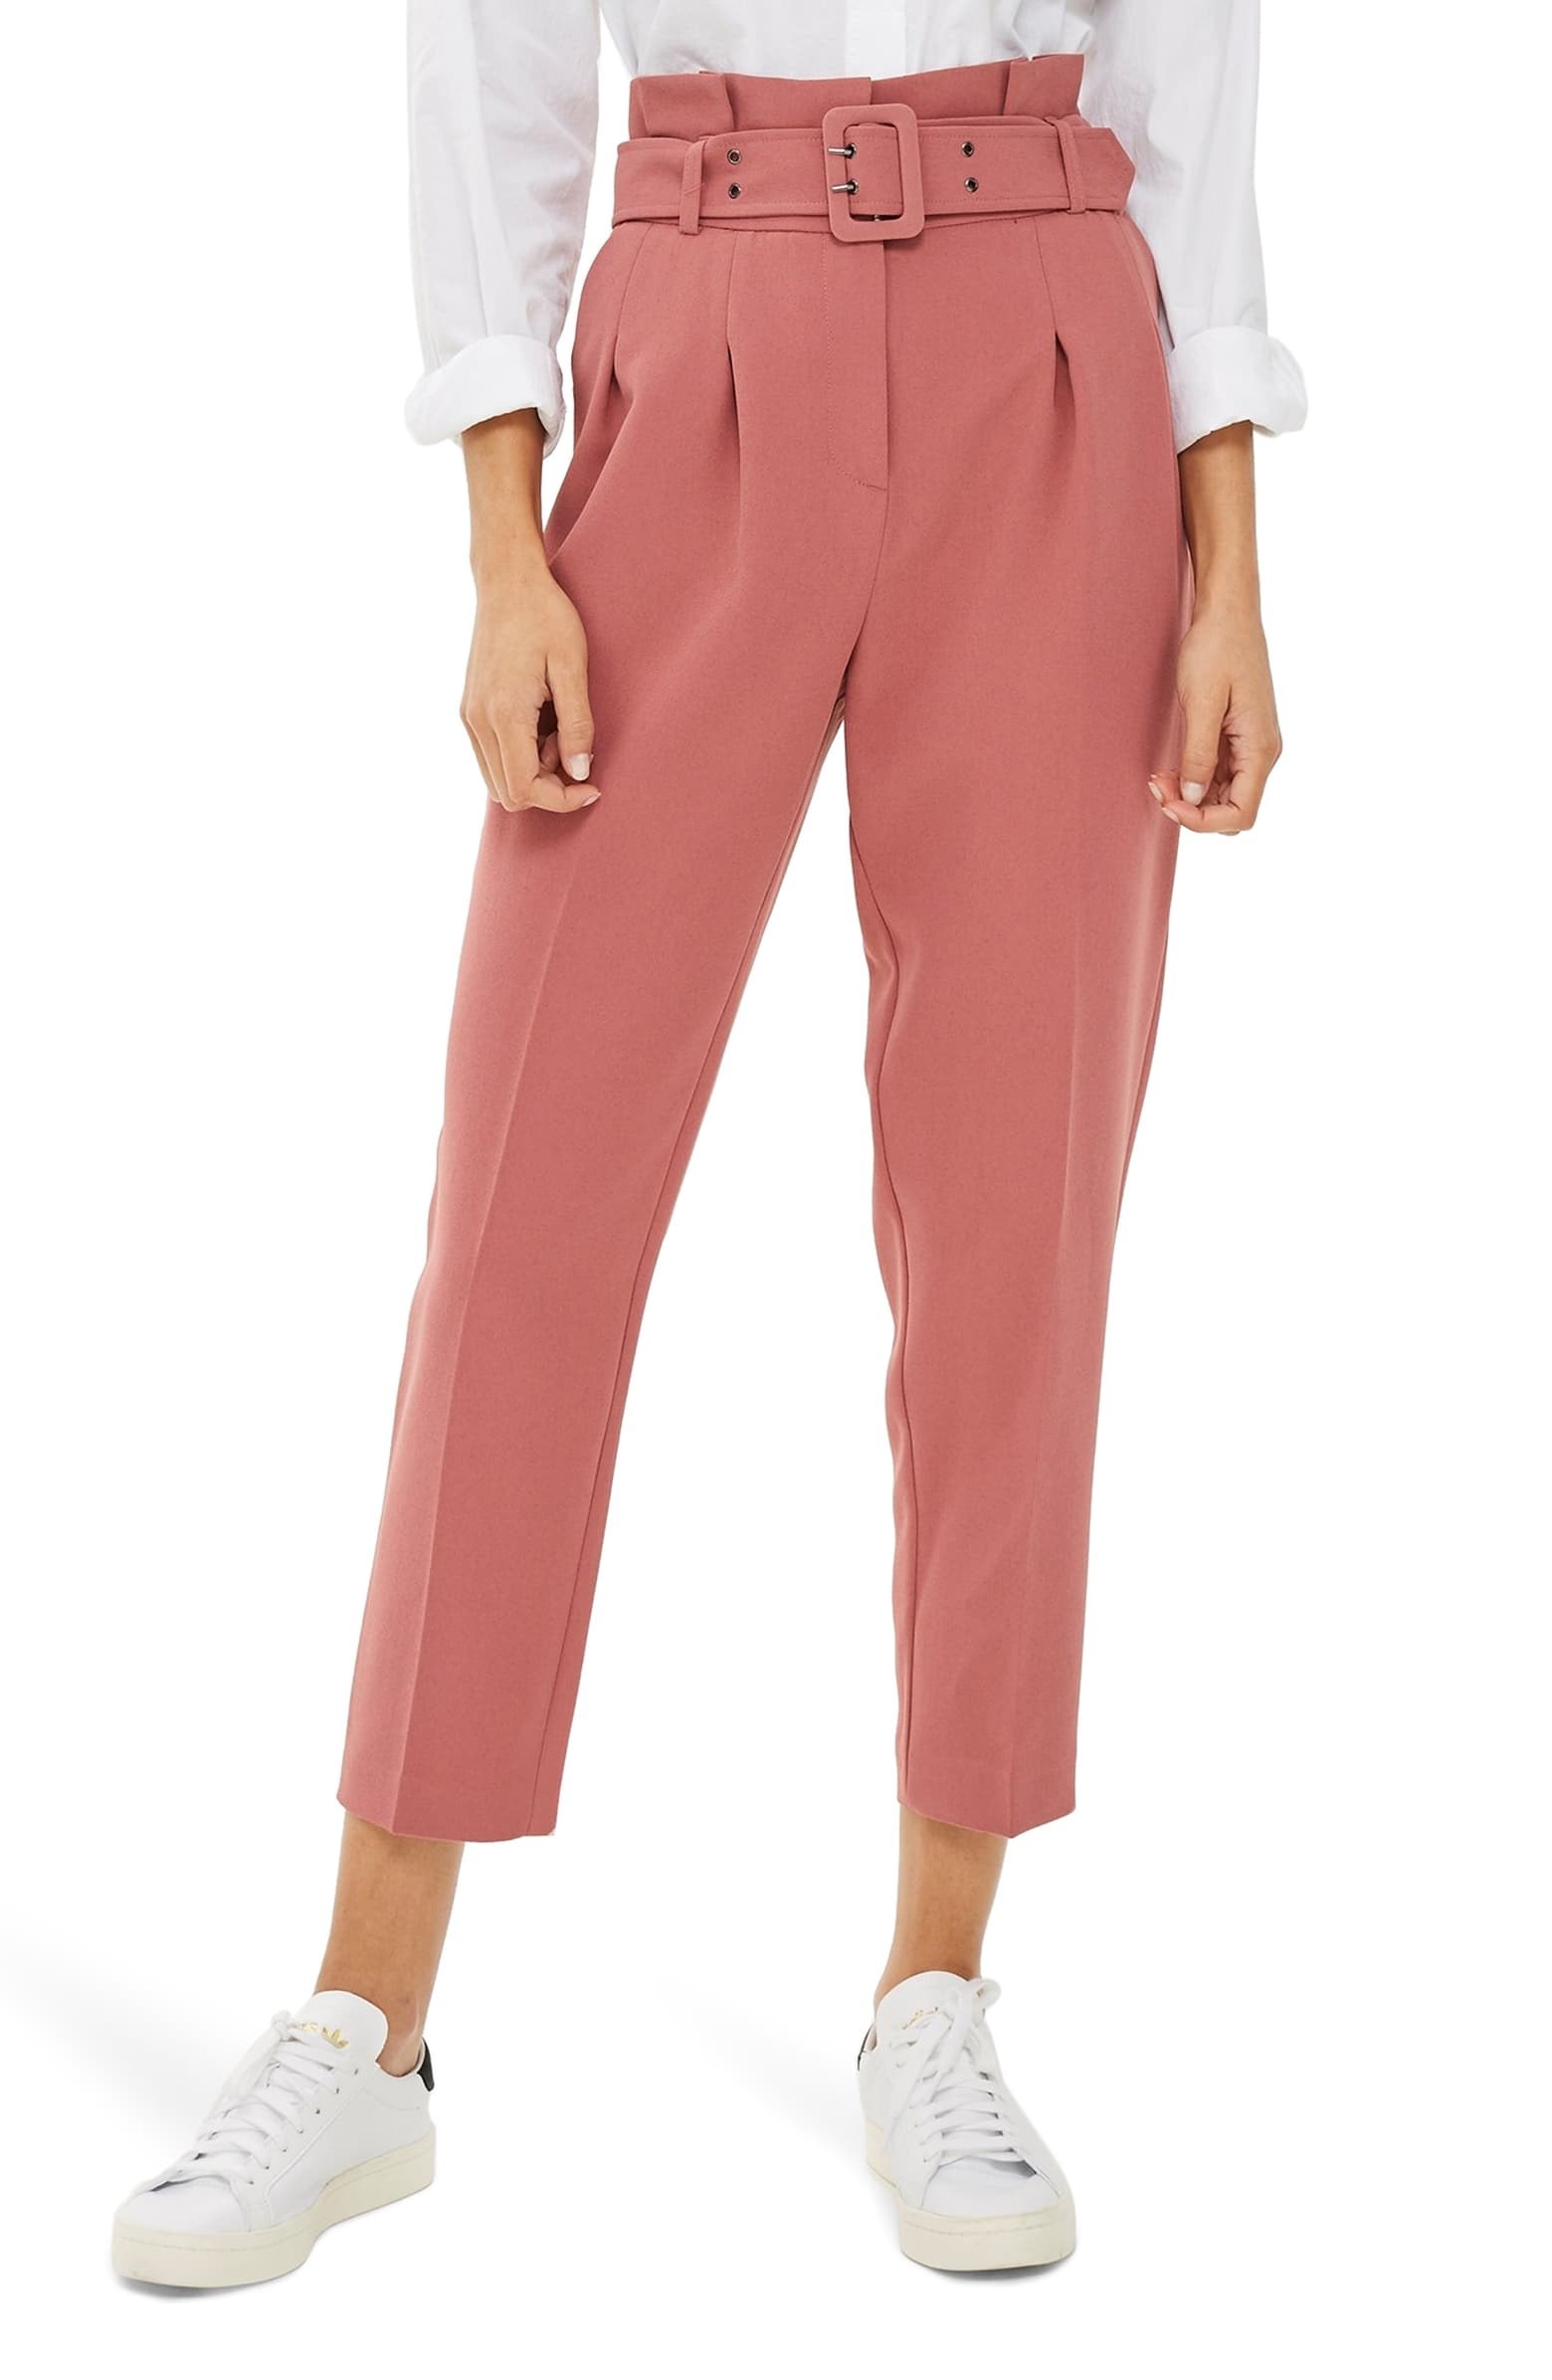 28 Comfy Pairs Of Pants You'll Want To Replace All Your Jeans With